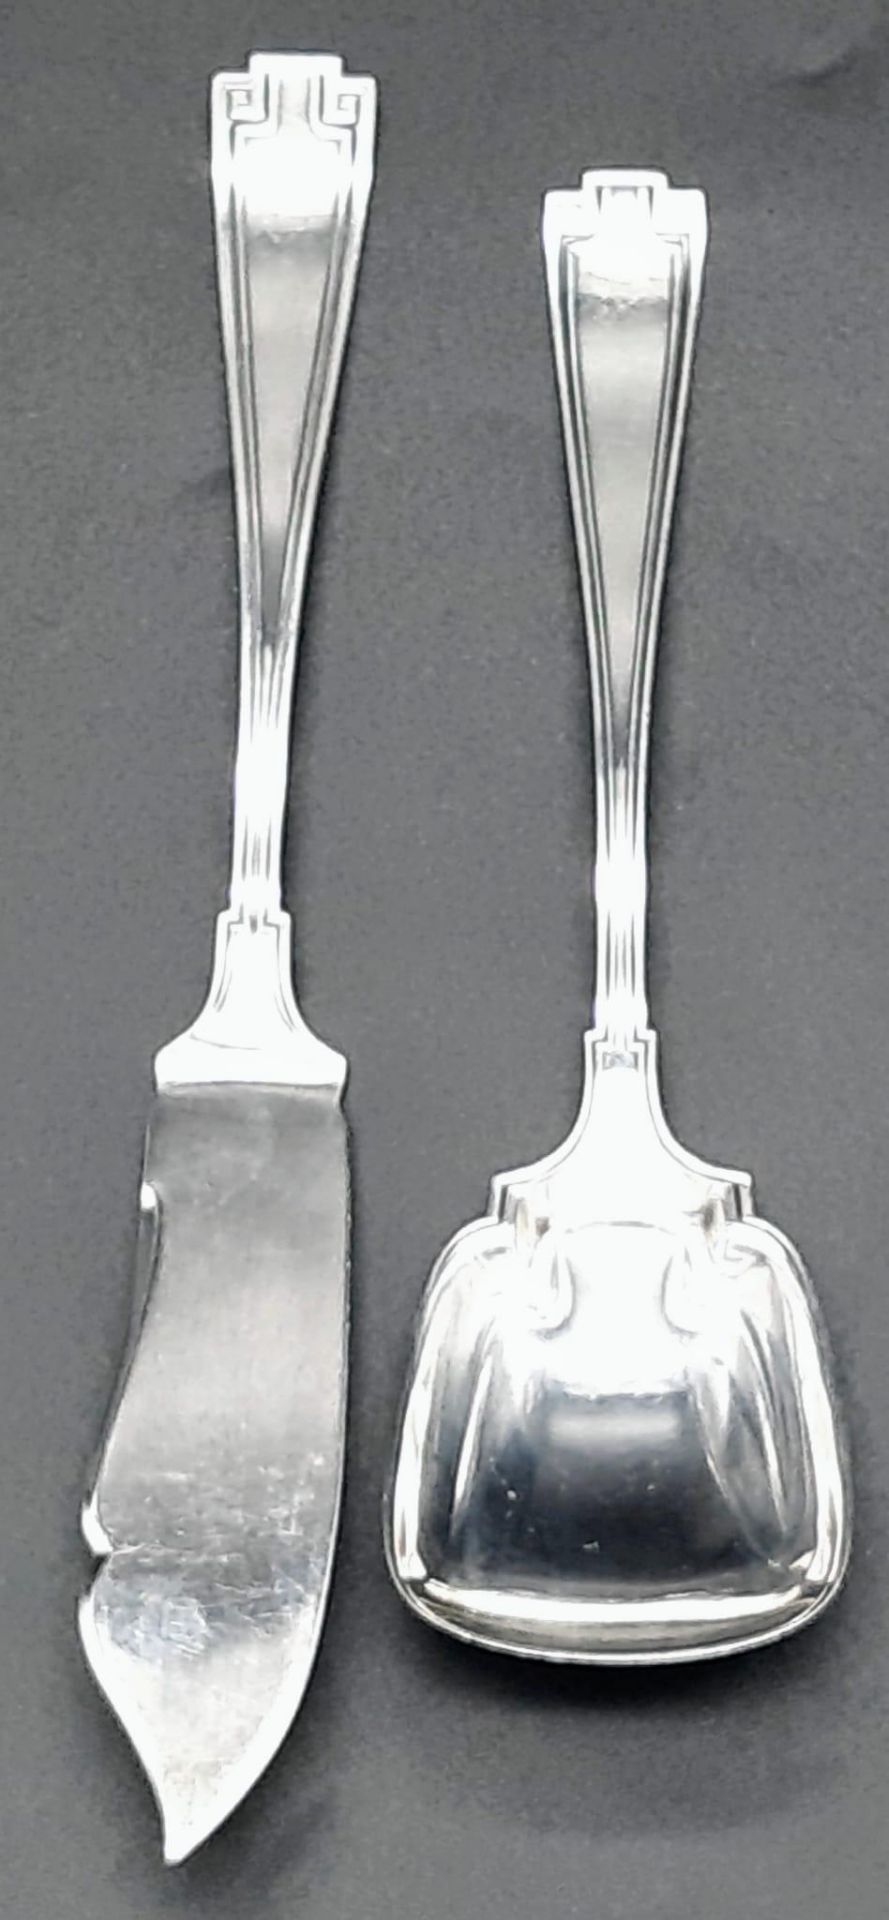 Parcel of, Early 1900s, Etruscan Sterling Silverware by Gorham, Birmingham. Includes a Sugar